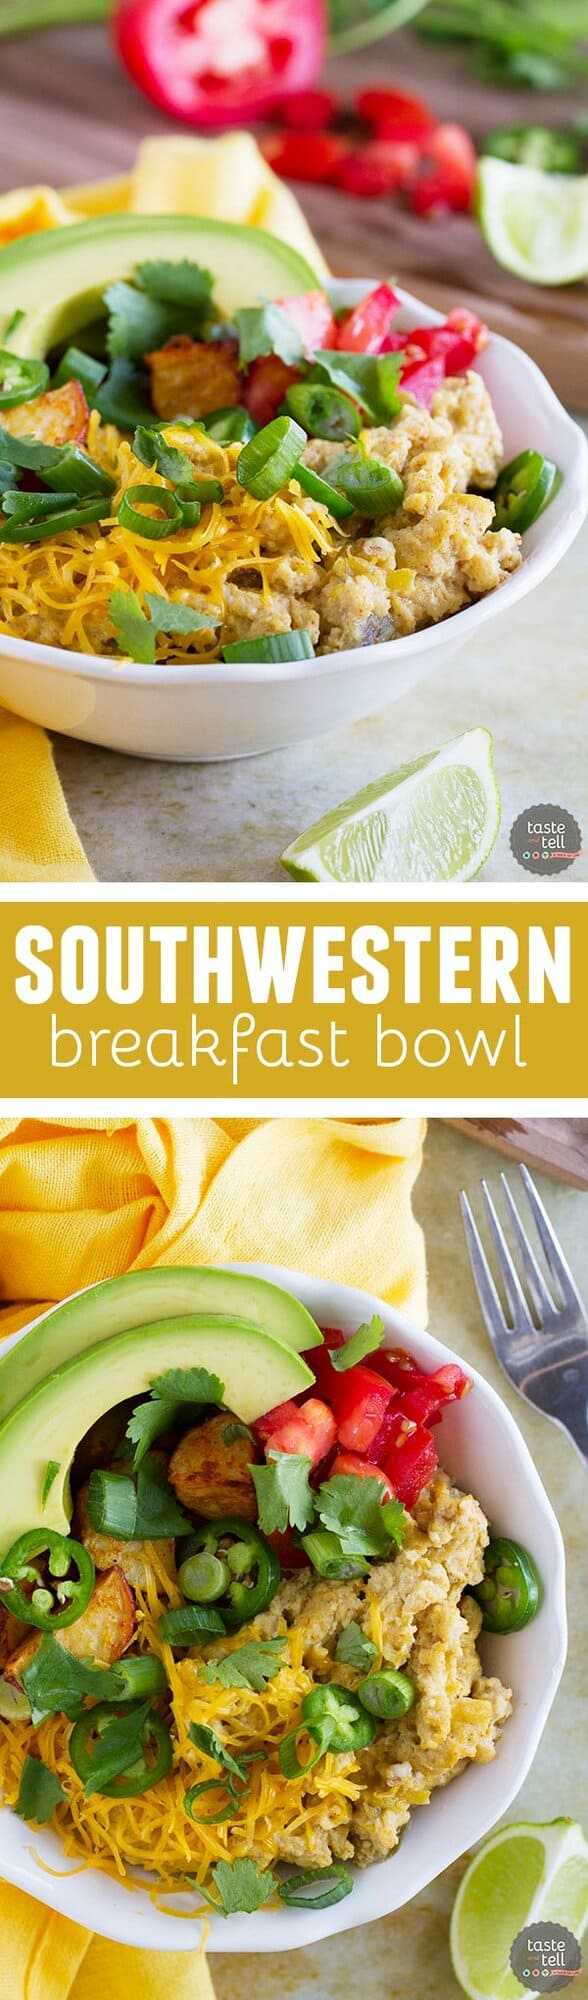 Start your morning with this breakfast bowl to top all breakfast bowls! Filling and full of flavor, this Southwestern Breakfast Bowl is the perfect breakfast.